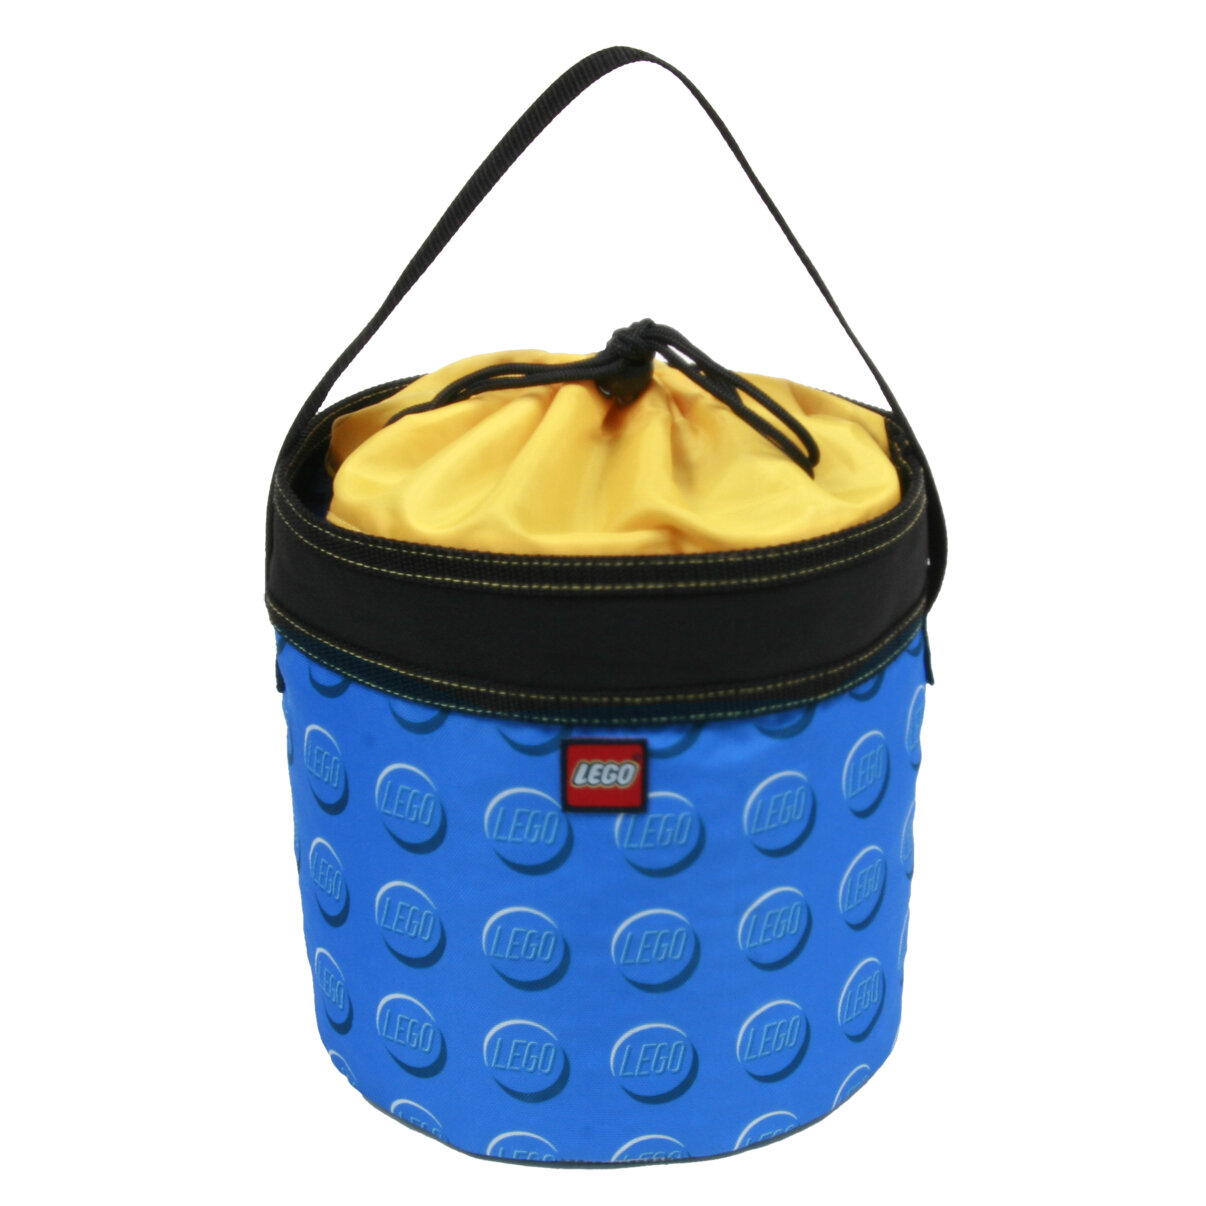 New LEGO STORAGE Bin Bucket Travel Collapse Bag Carry Organizer Red Blue  Tote